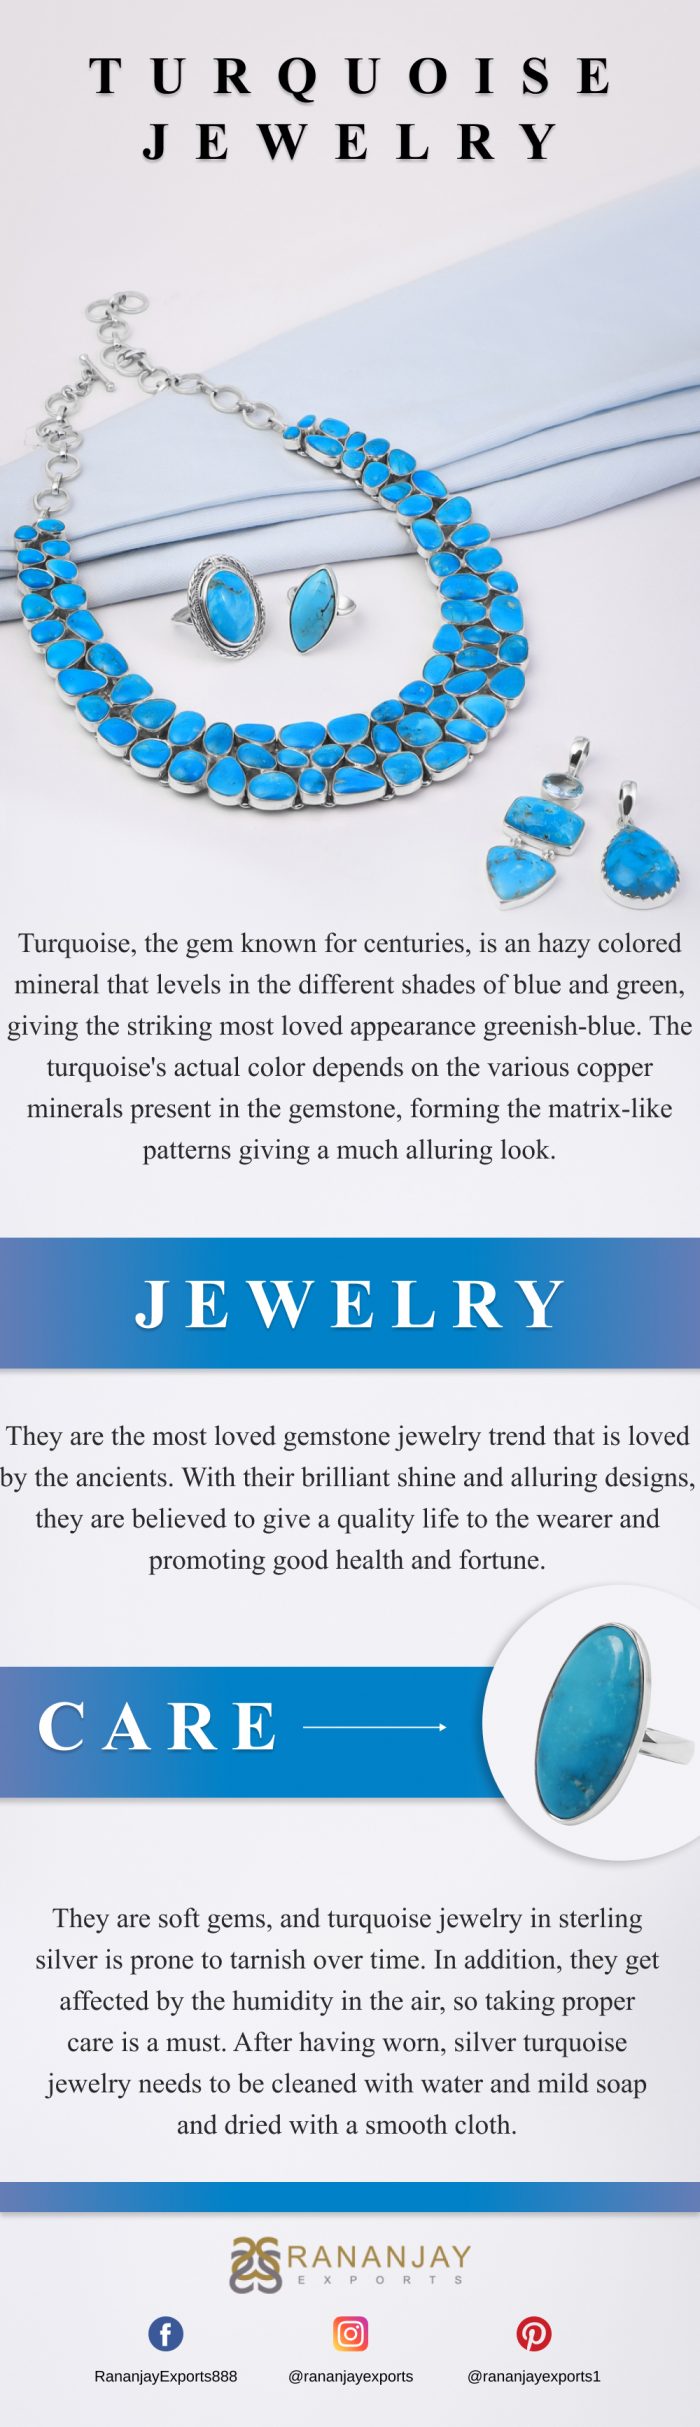 Wholesale Turquoise jewelry and care